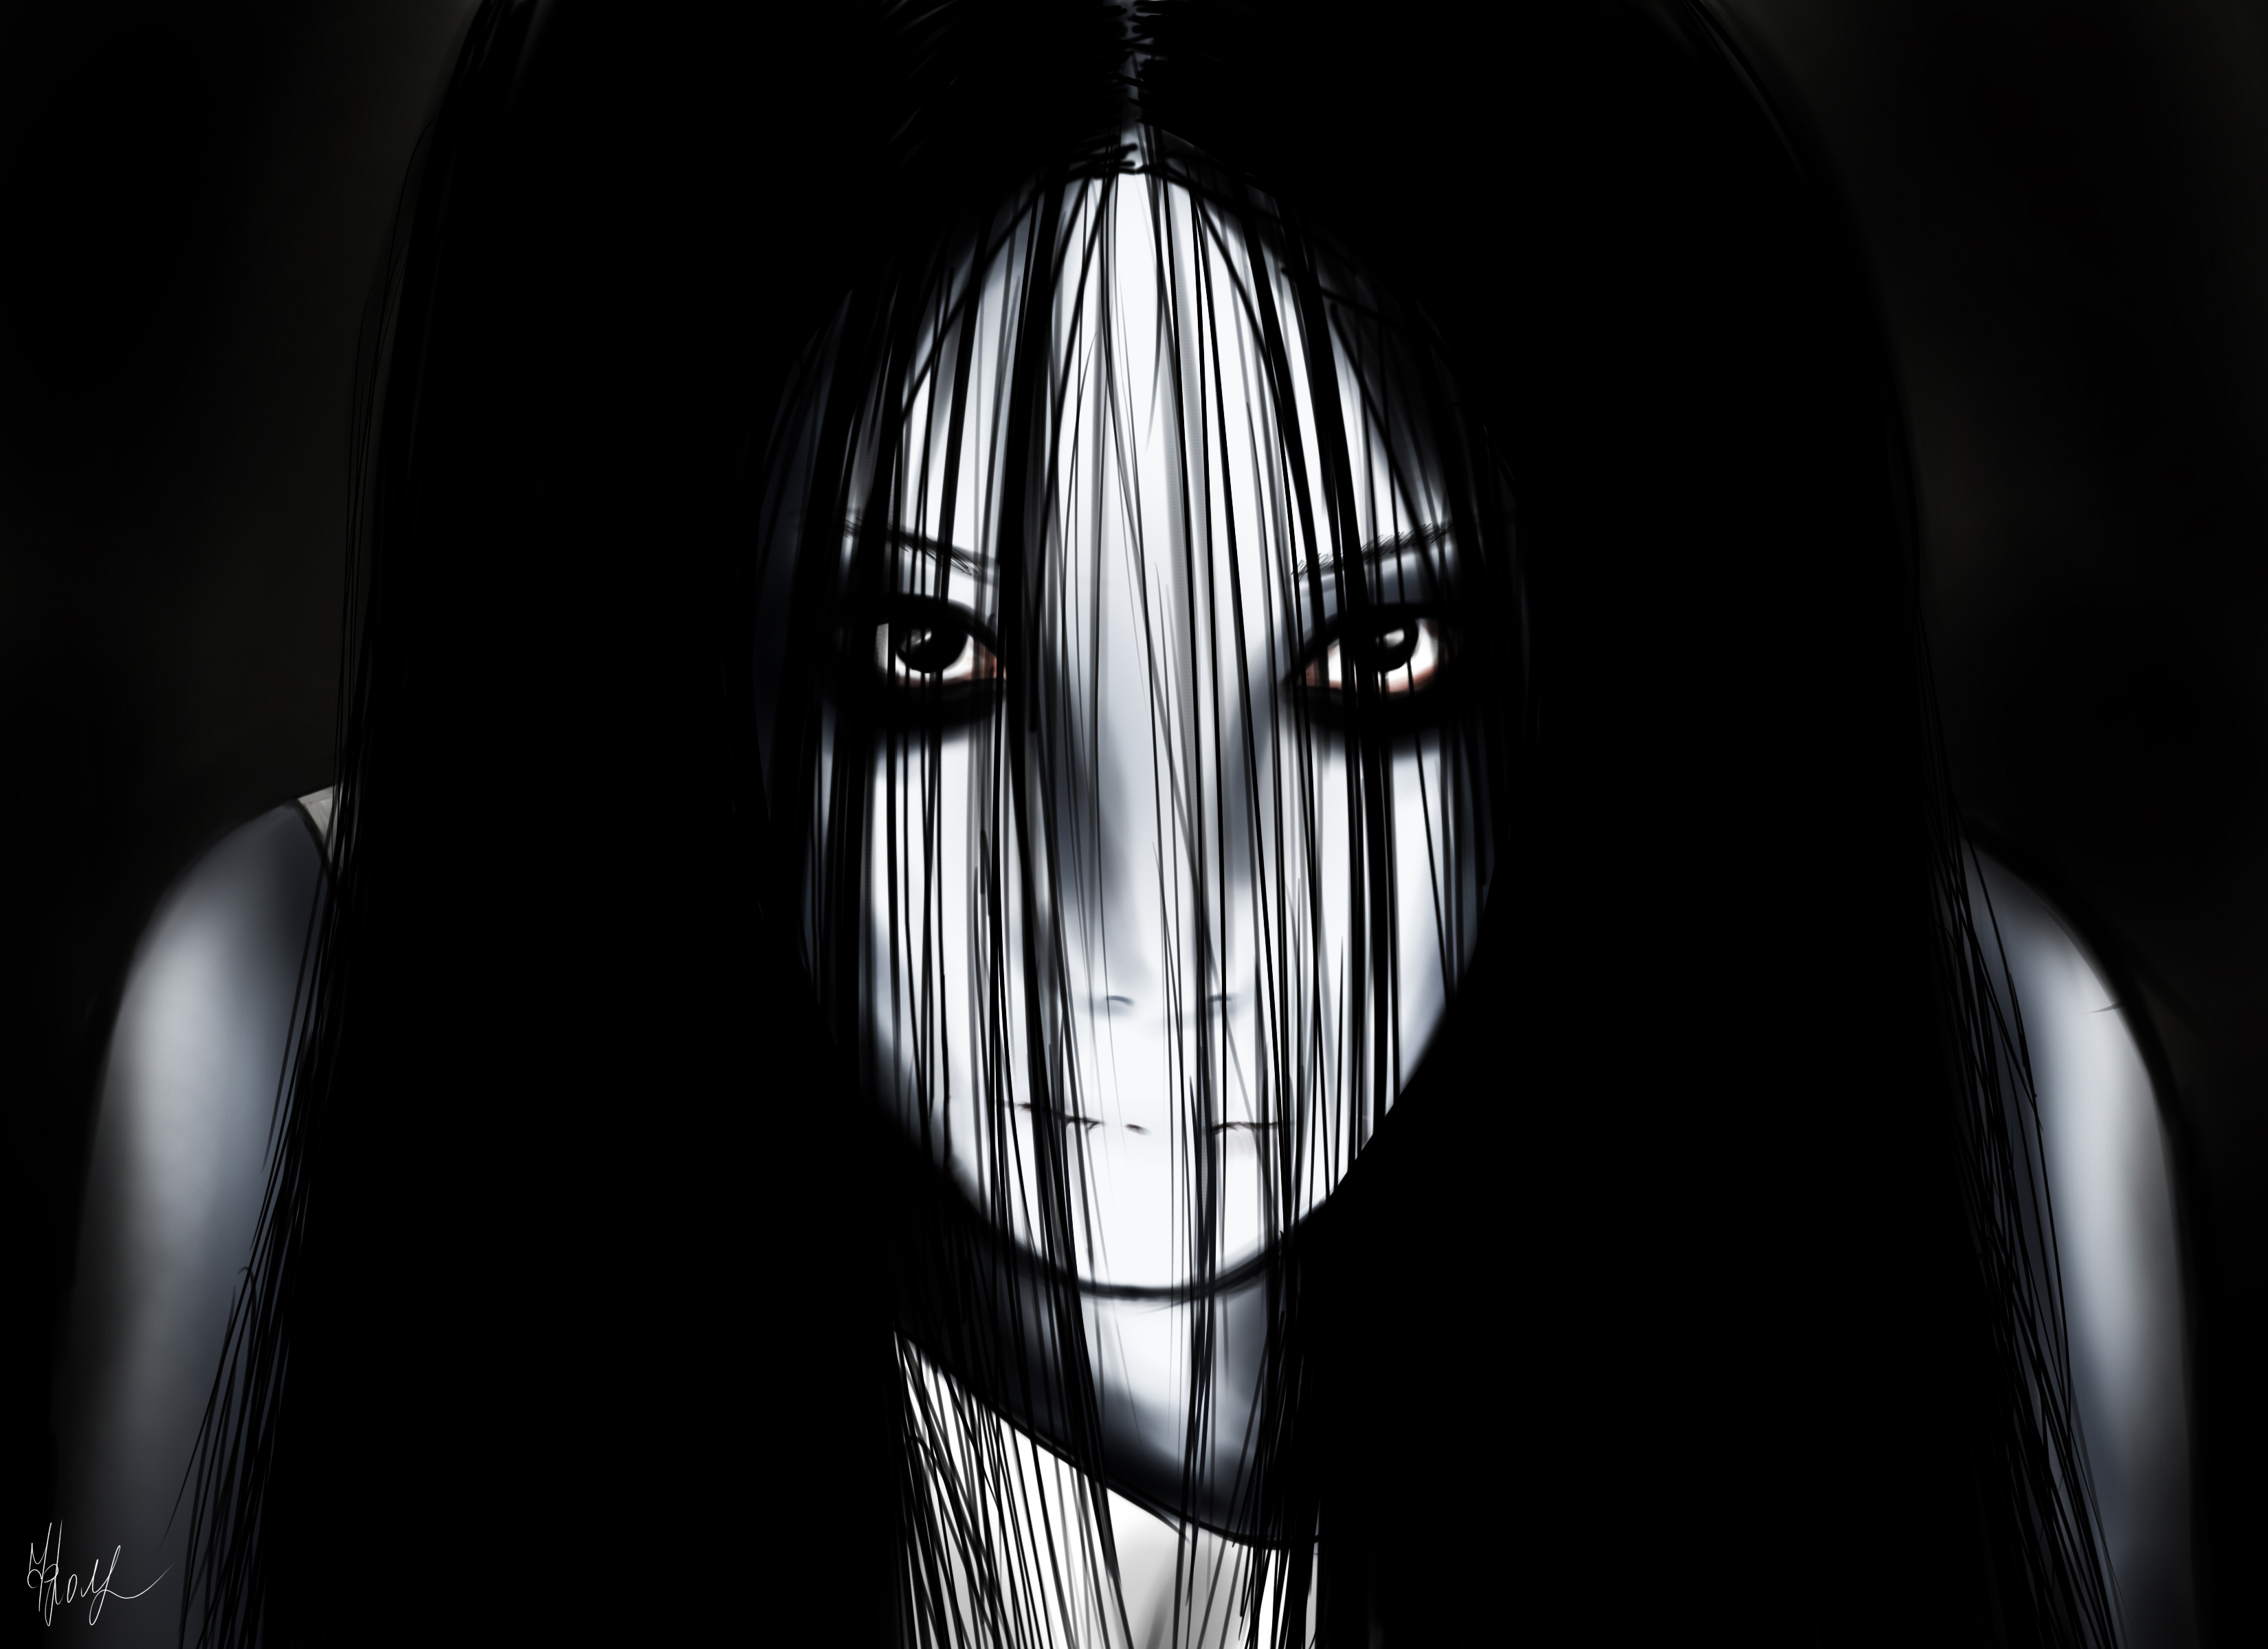 Movie - The Grudge Wallpapers and Backgrounds ID : 445158